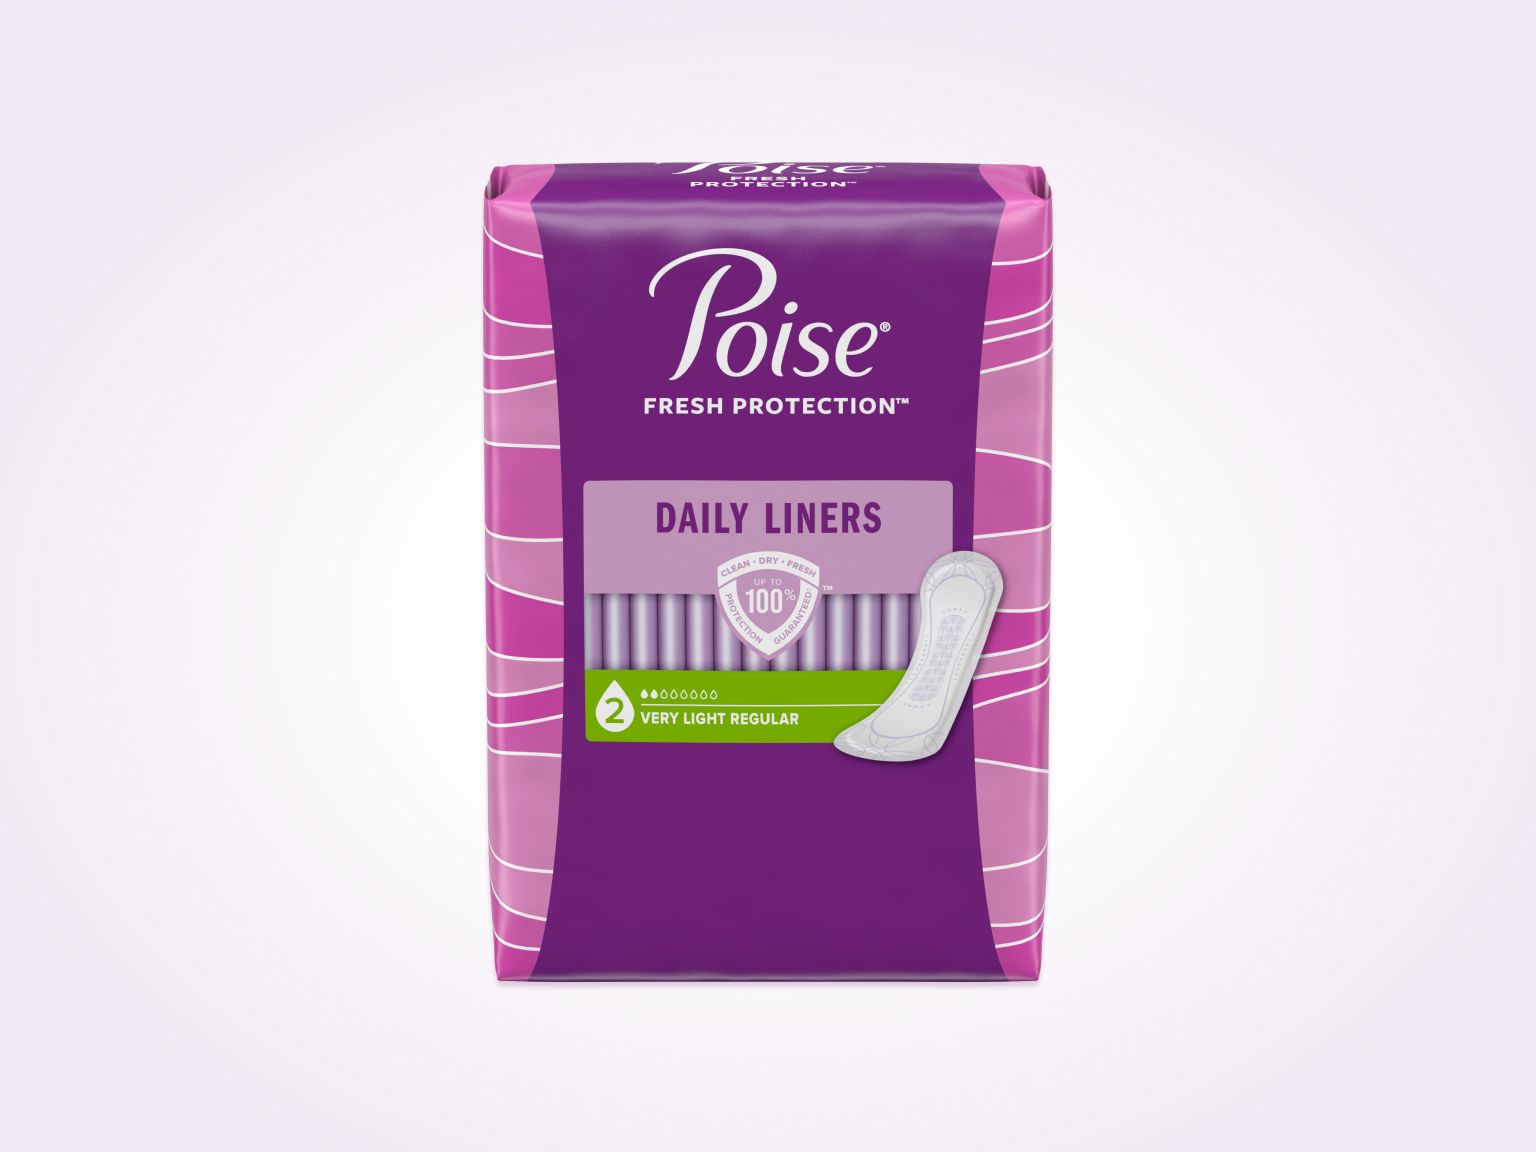 Seize the Summer with Poise Microliners ~ #PoiseLinerLove